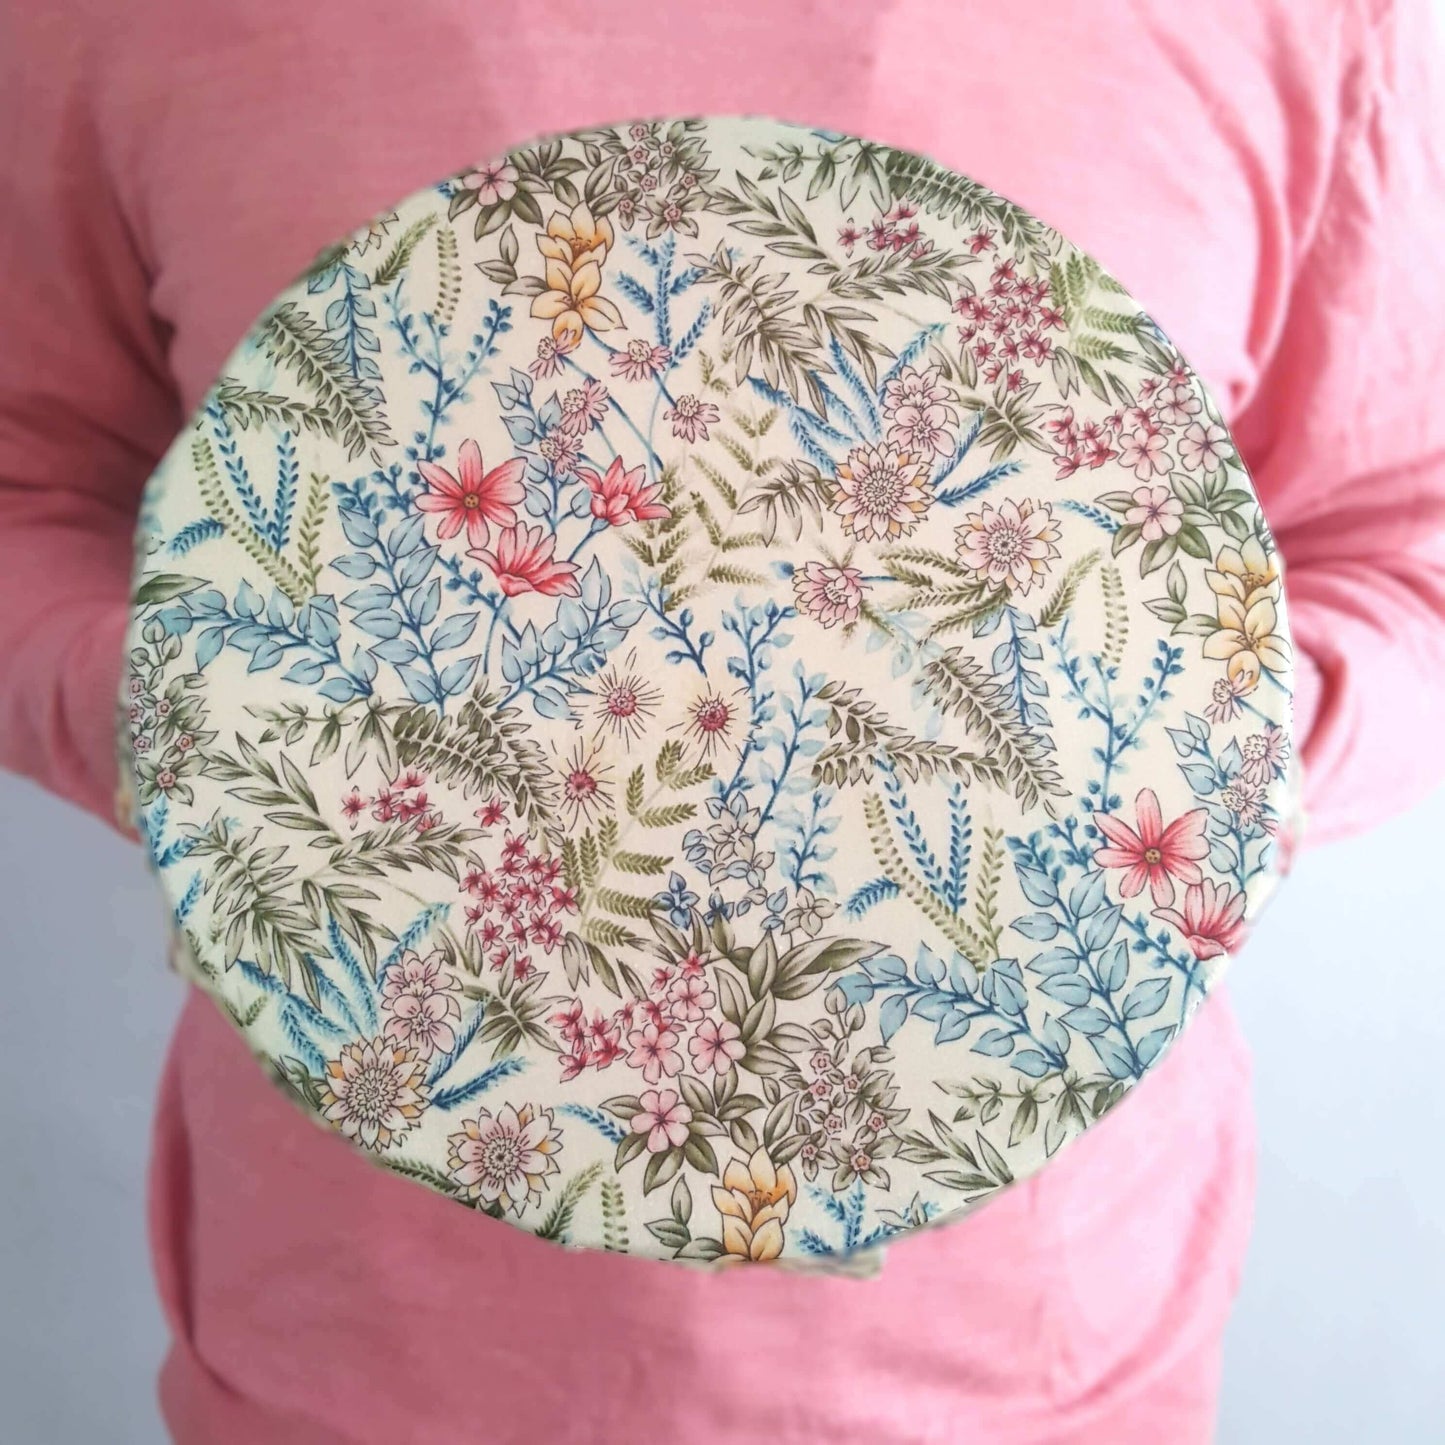 Reusable Beeswax Food Wraps 100% Hand Made in the UK by Honey Bee Good shown in Set of 3 Classic Botanical on bowl